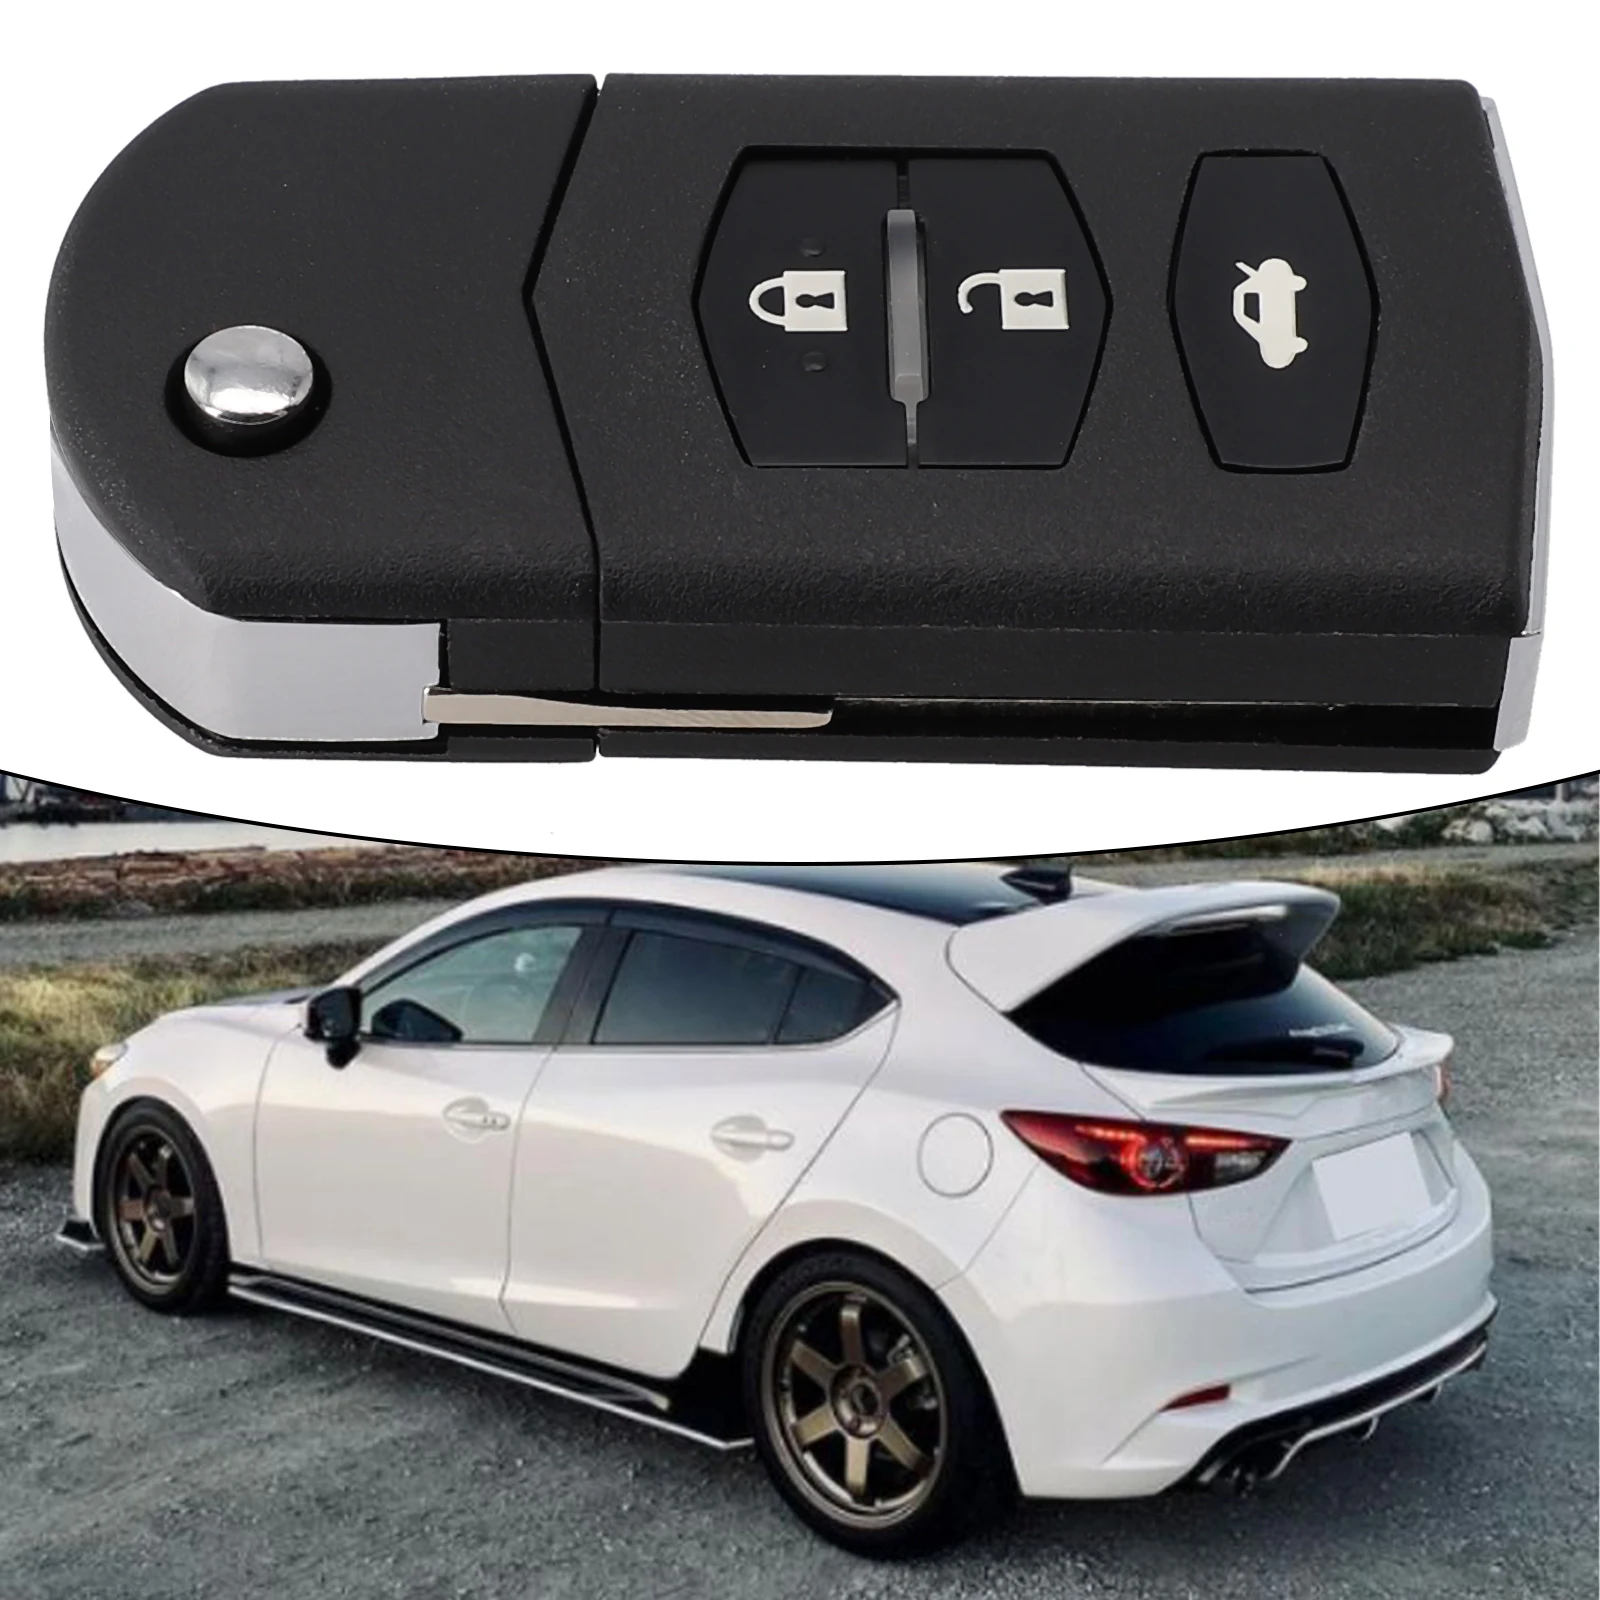 1PCS 3 Buttons Blade Case Car Key Protection Shell CR1620  Battery Flip Fob Suitable For Mazda MX5 RX8 MPV CX7 CX9 Accessories lot 10pcs extended 6xaa battery case box shell for baofeng uv 5r uv5r 5ra 5rb 5ra bl 5l radio walkie talkie accessories